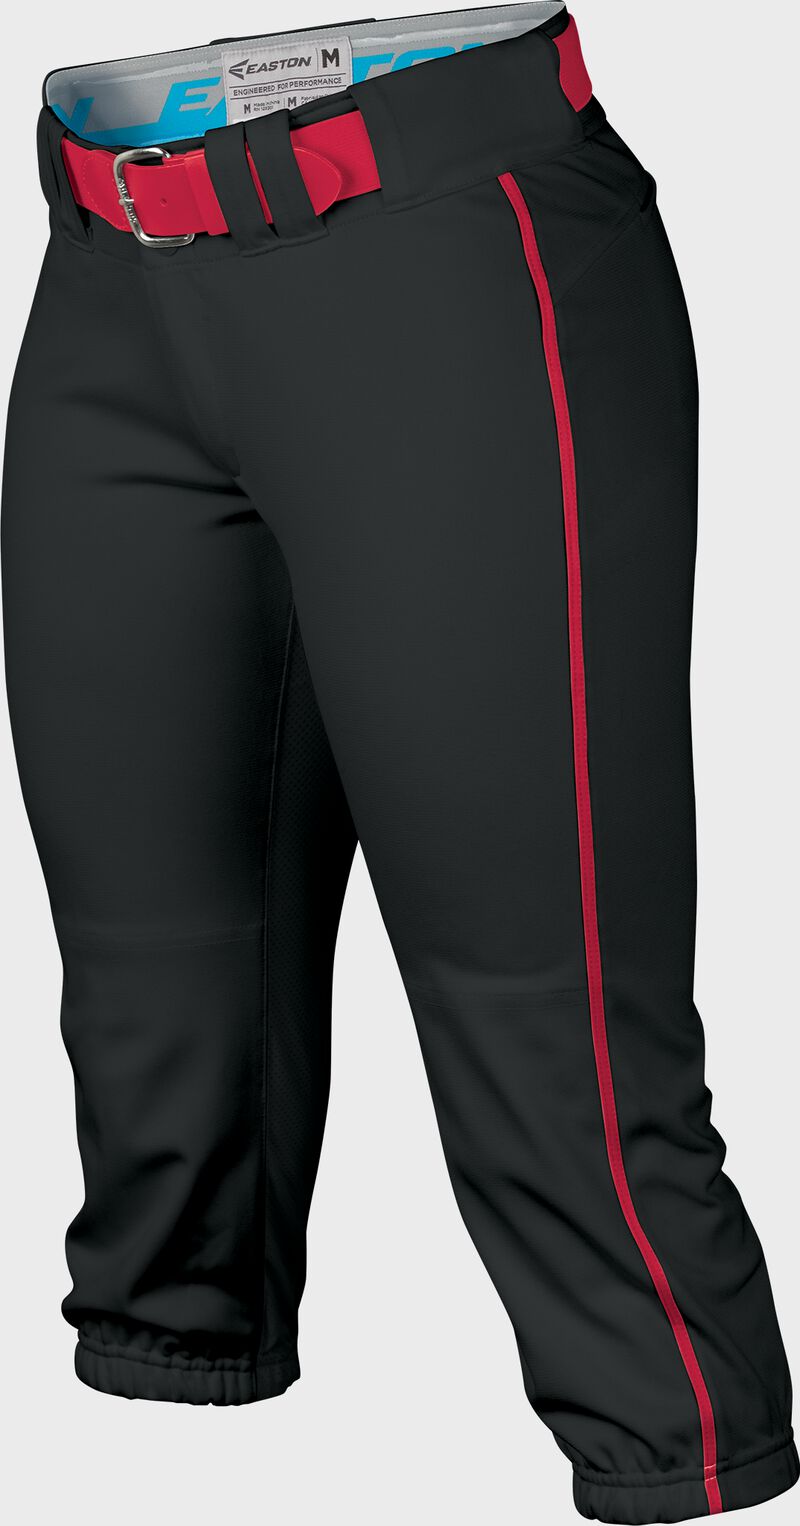 Easton Prowess Softball Pant Women's Piped BLACK/RED  L